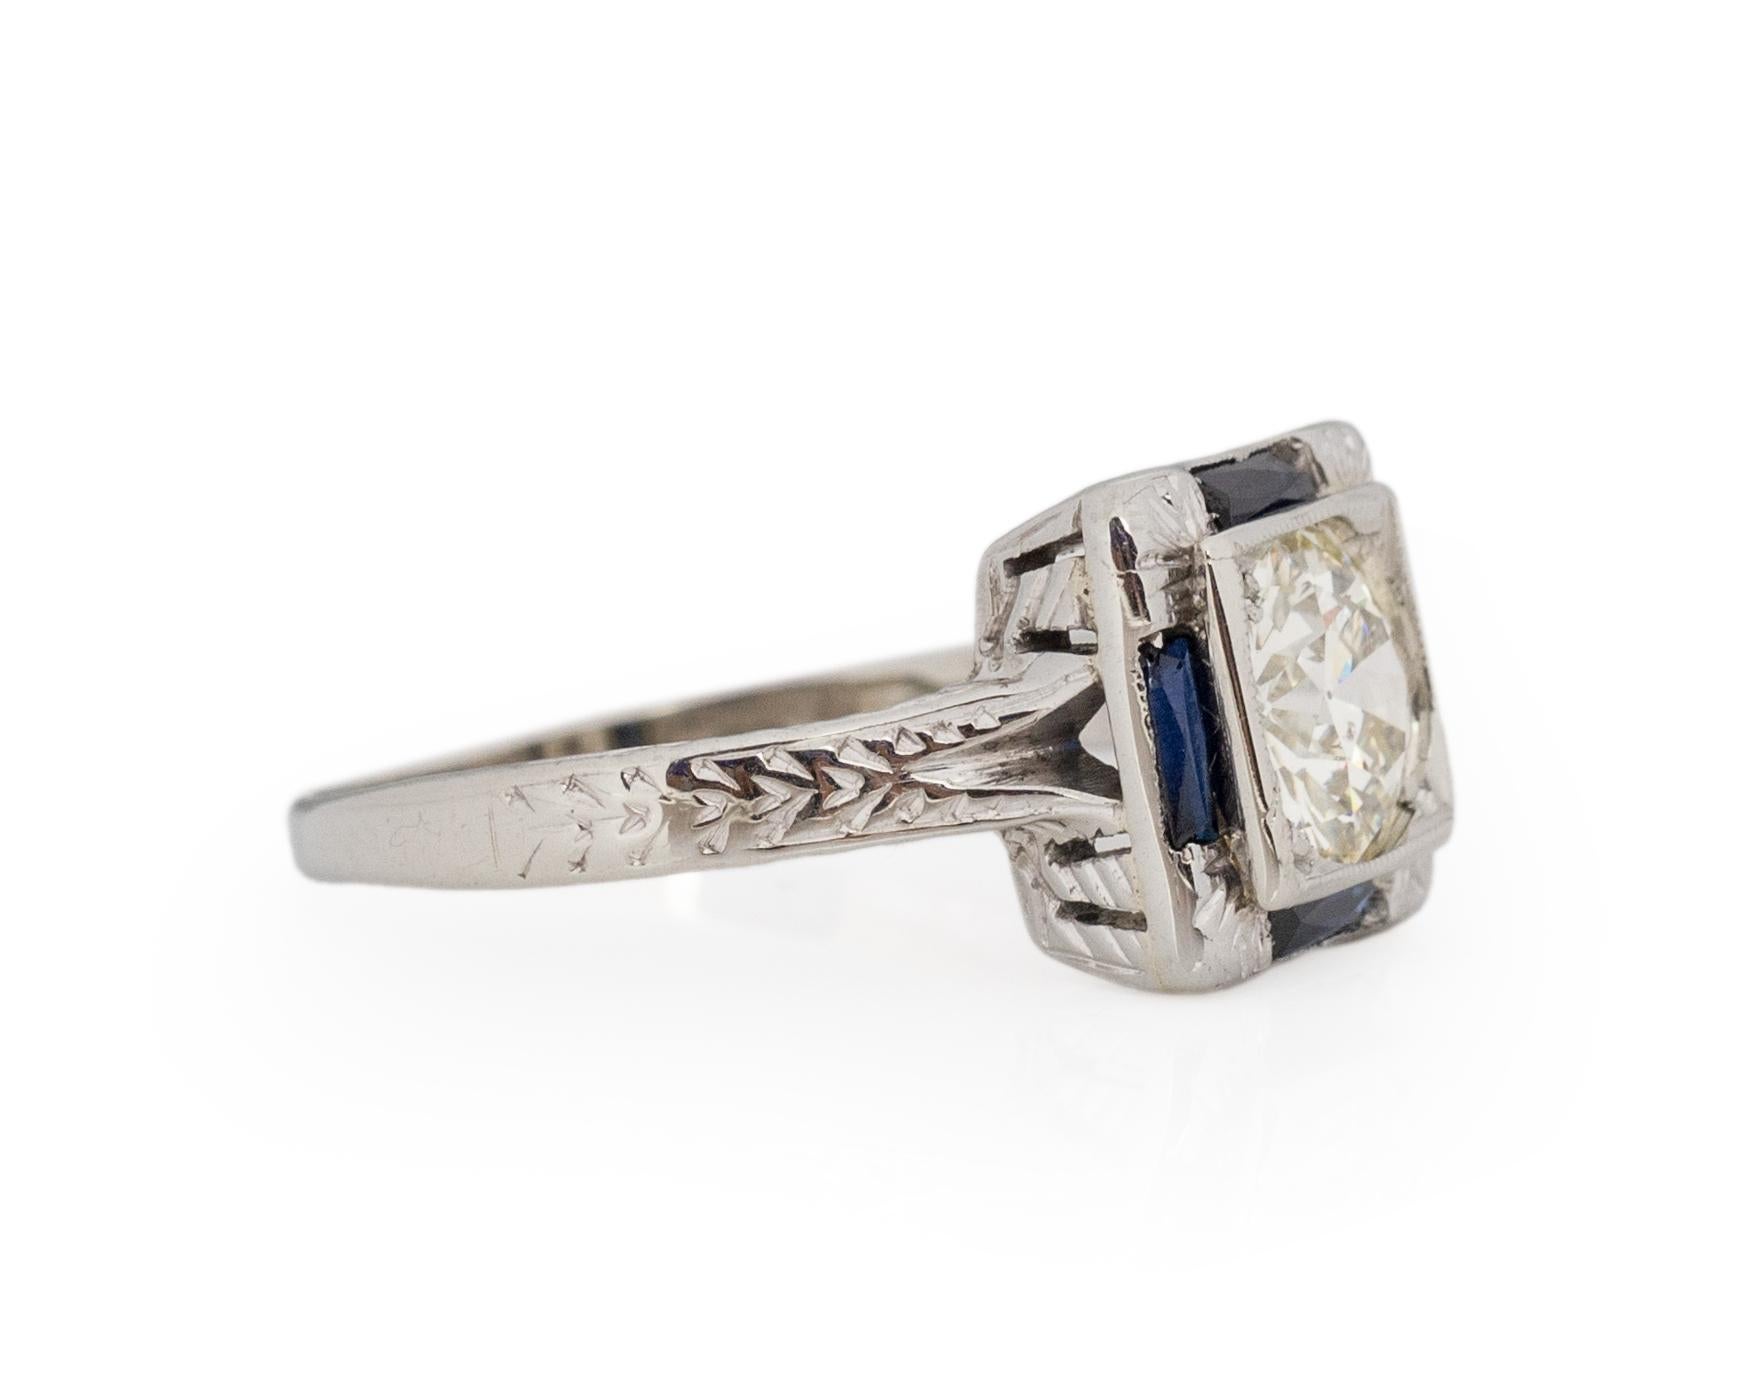 Ring Size: 6.5
Metal Type: 18karat White Gold [Hallmarked, and Tested]
Weight: 3.0 grams

Center Diamond Details:
Weight: .92carat
Cut: Old European brilliant
Color: K
Clarity: SI2

Side Stone Details:
Weight: .25carat, total weight
Cut: Antique